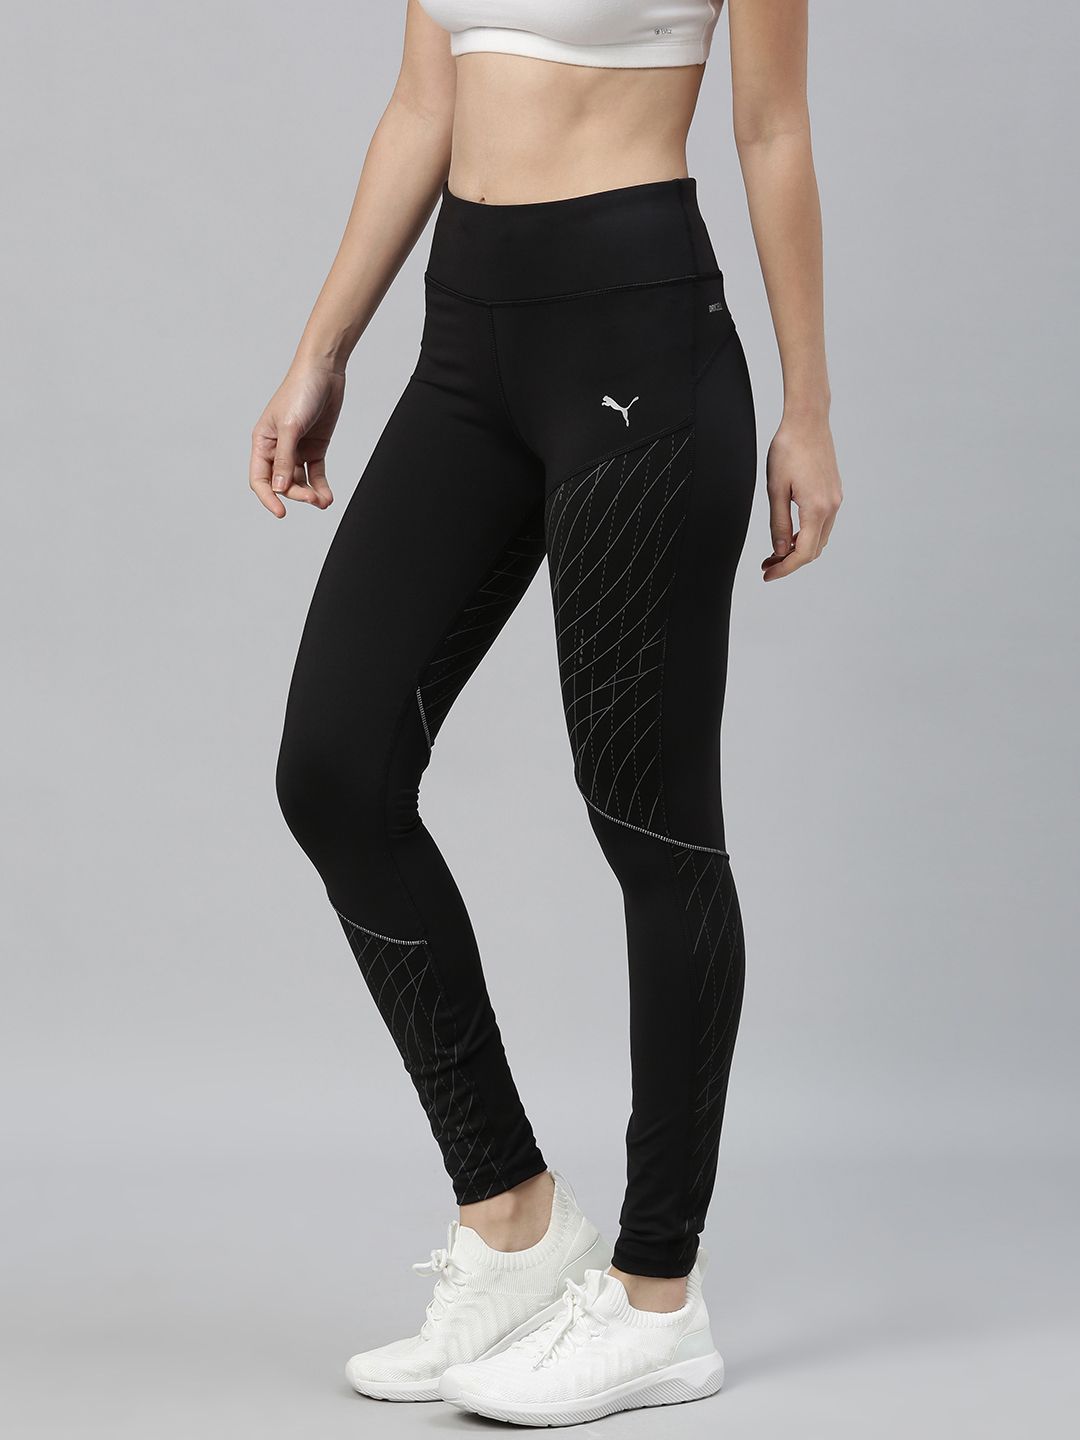 Puma Women Black Printed Knitted Graphic Regular Rise Long Running Tights Price in India